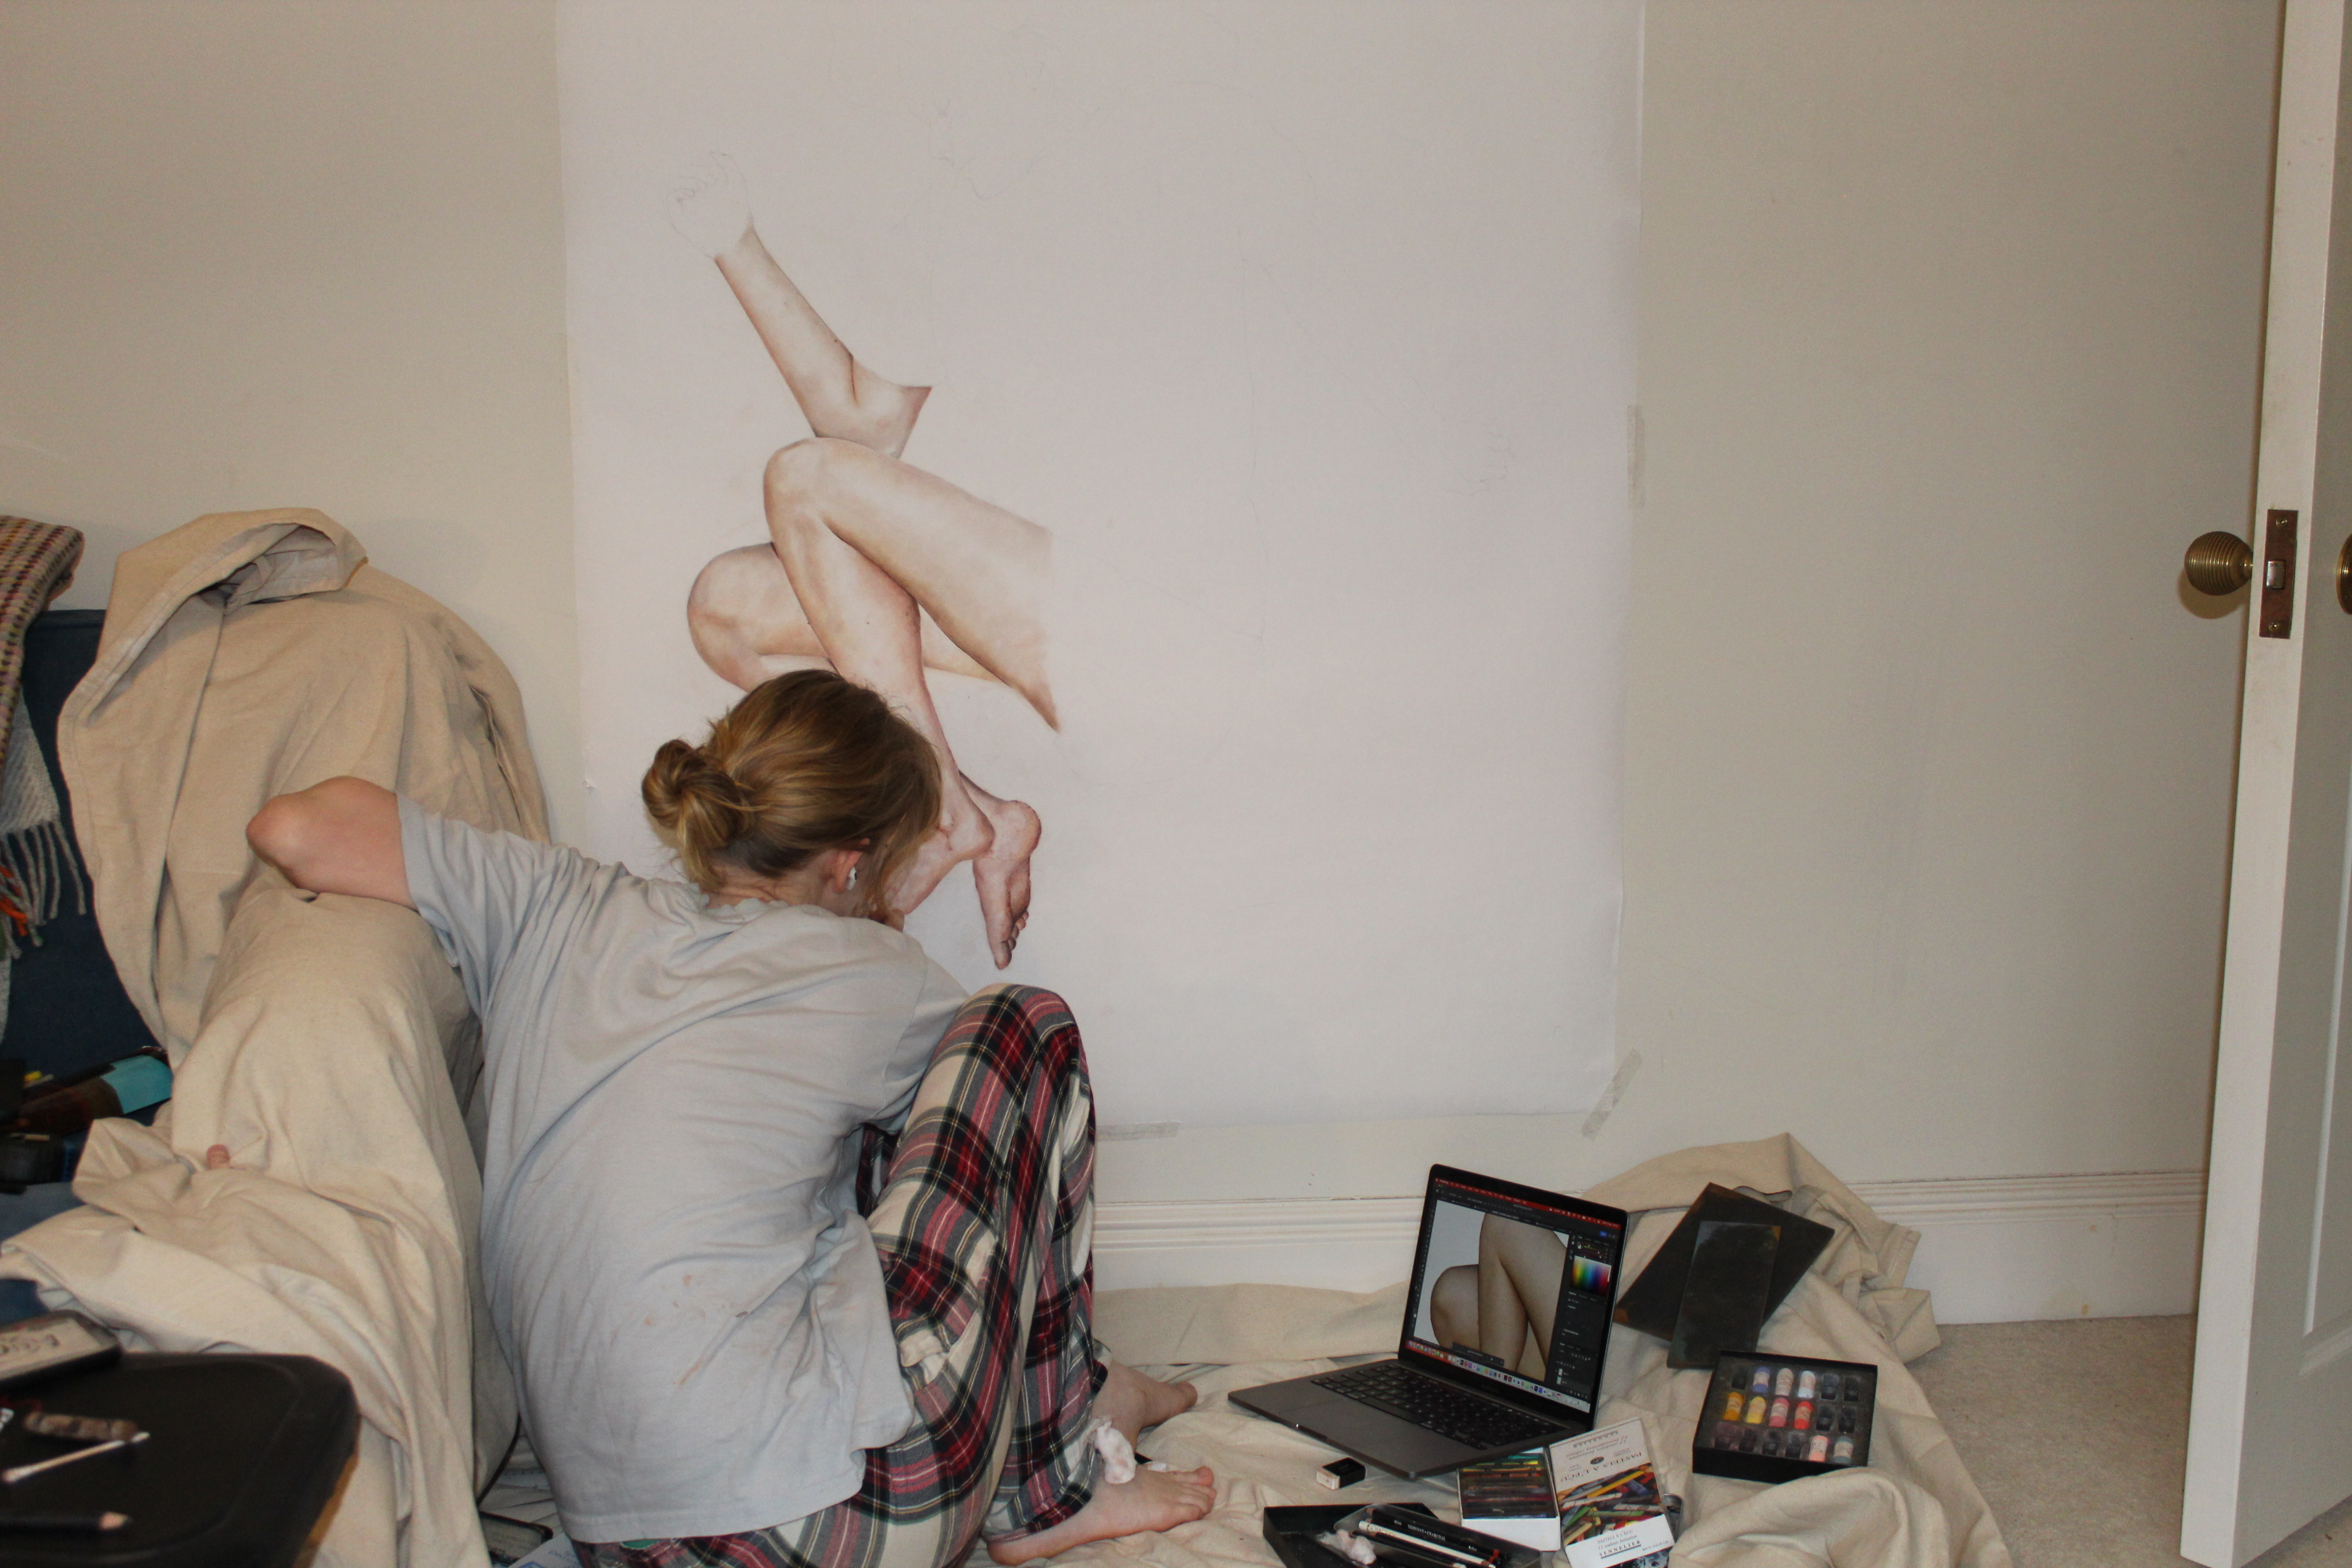 a student paints a canvas, working from a photograph of entwined bodies on her laptop screen